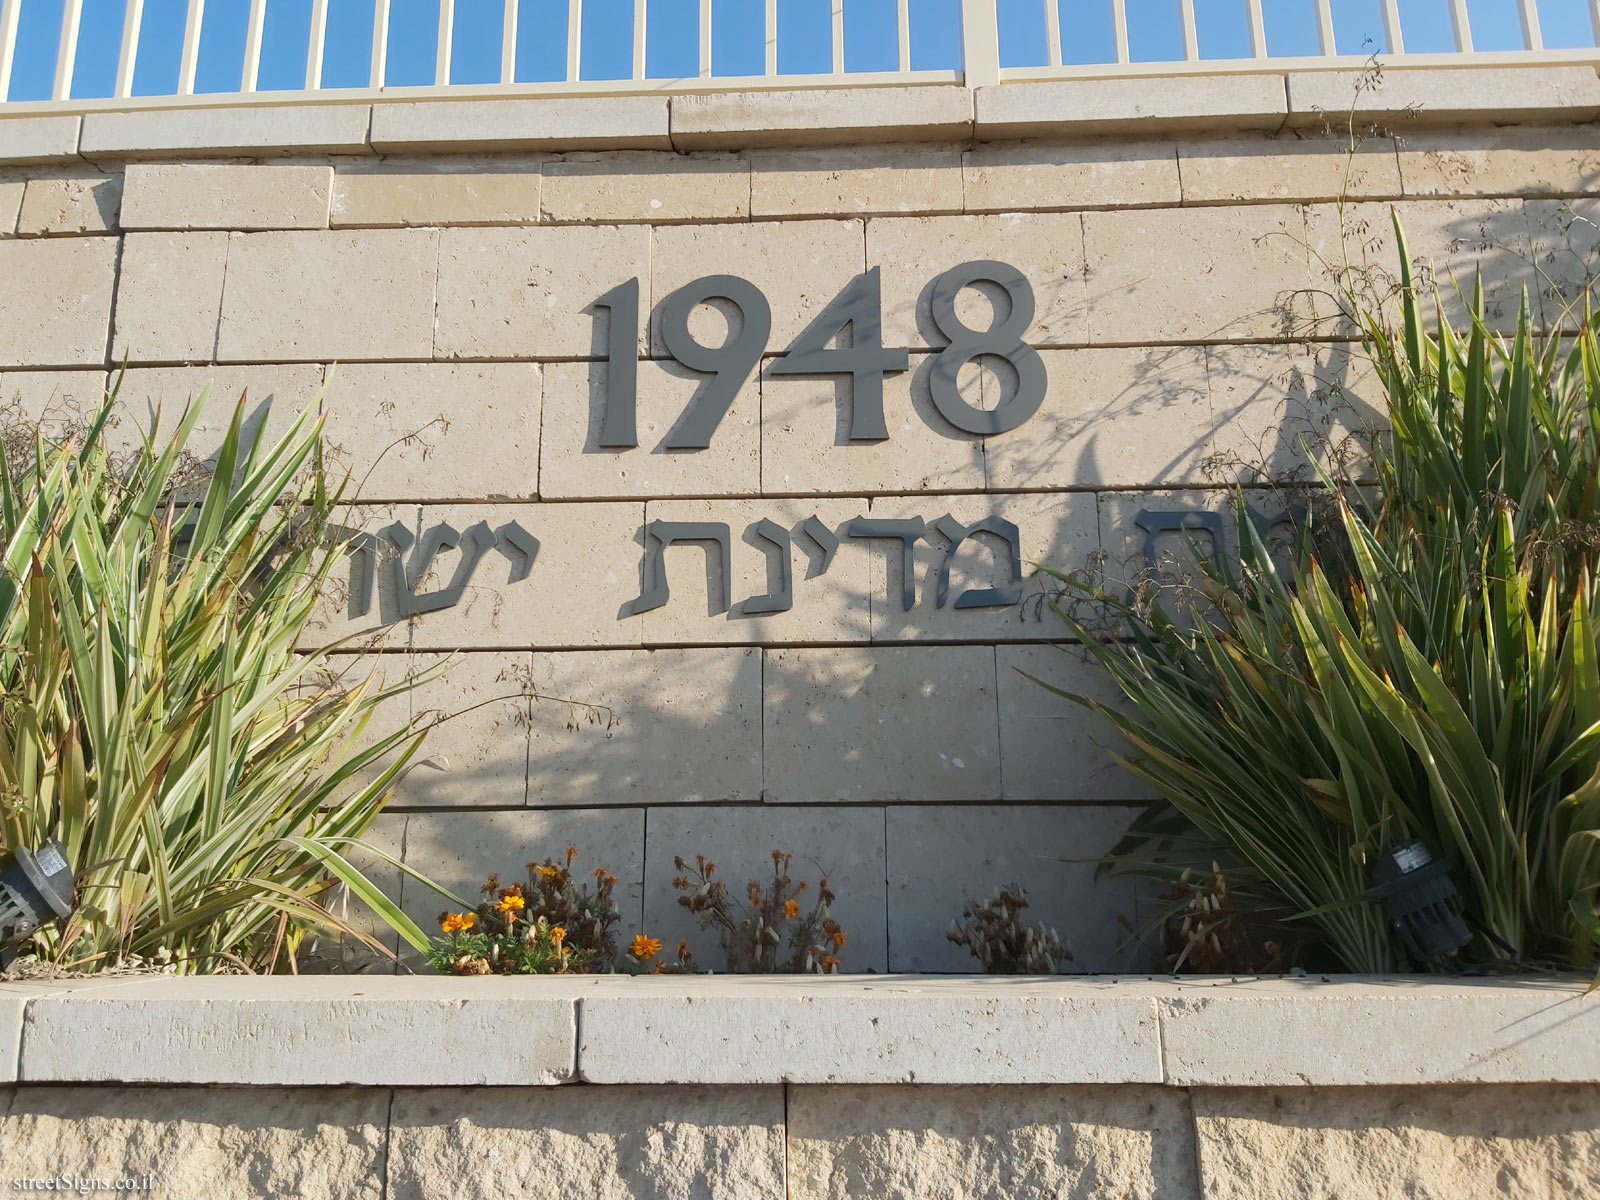 Gedera - The historic wall - 1948 - Establishment of the State of Israel